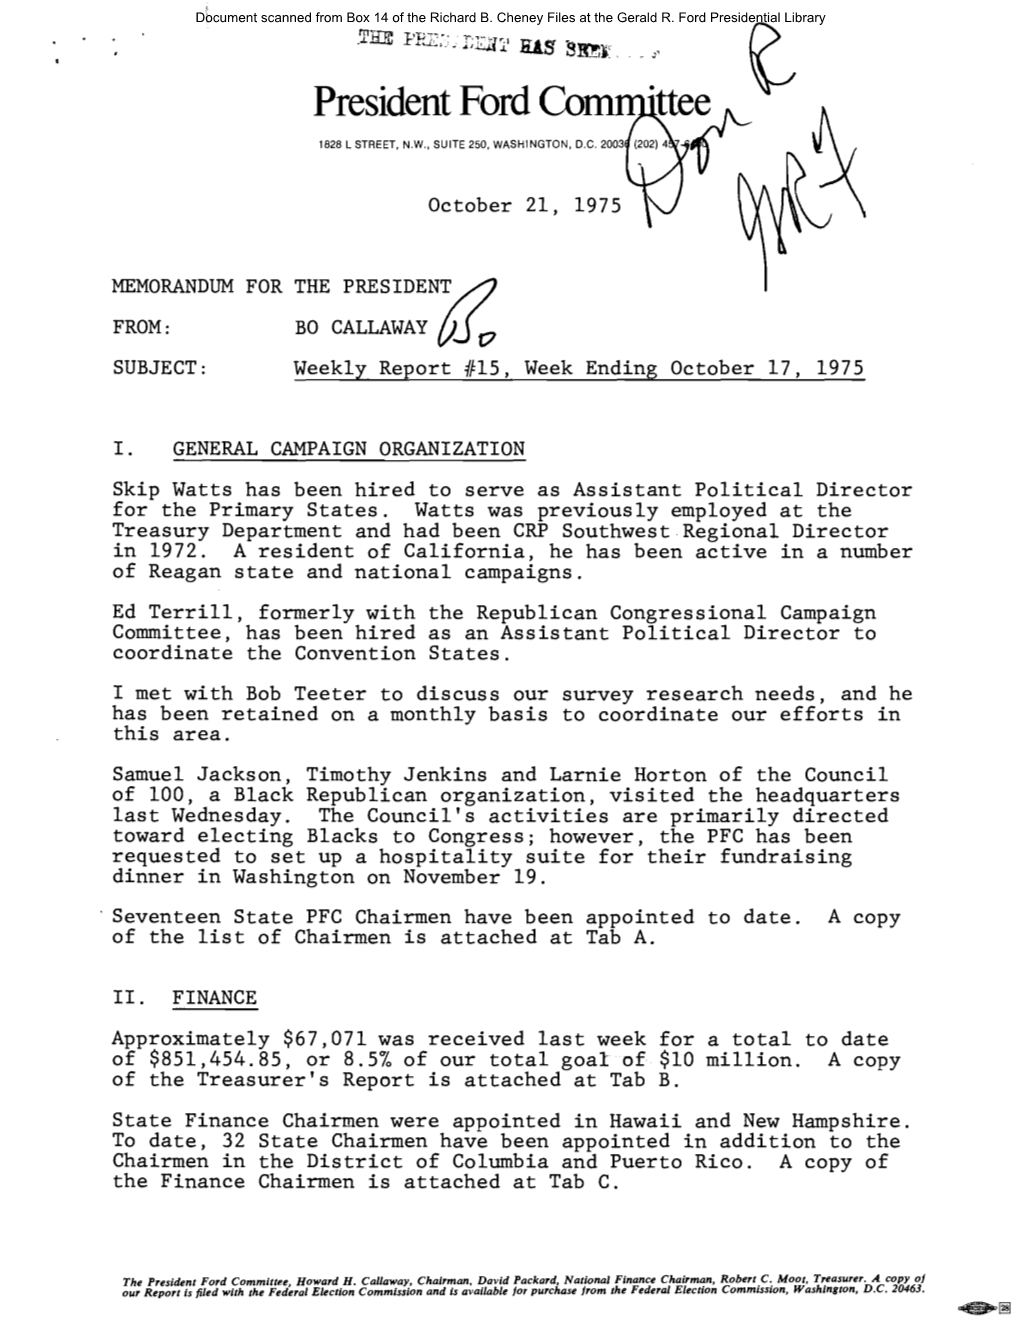 President Ford Committee Weekly Report #15, October 21, 1975